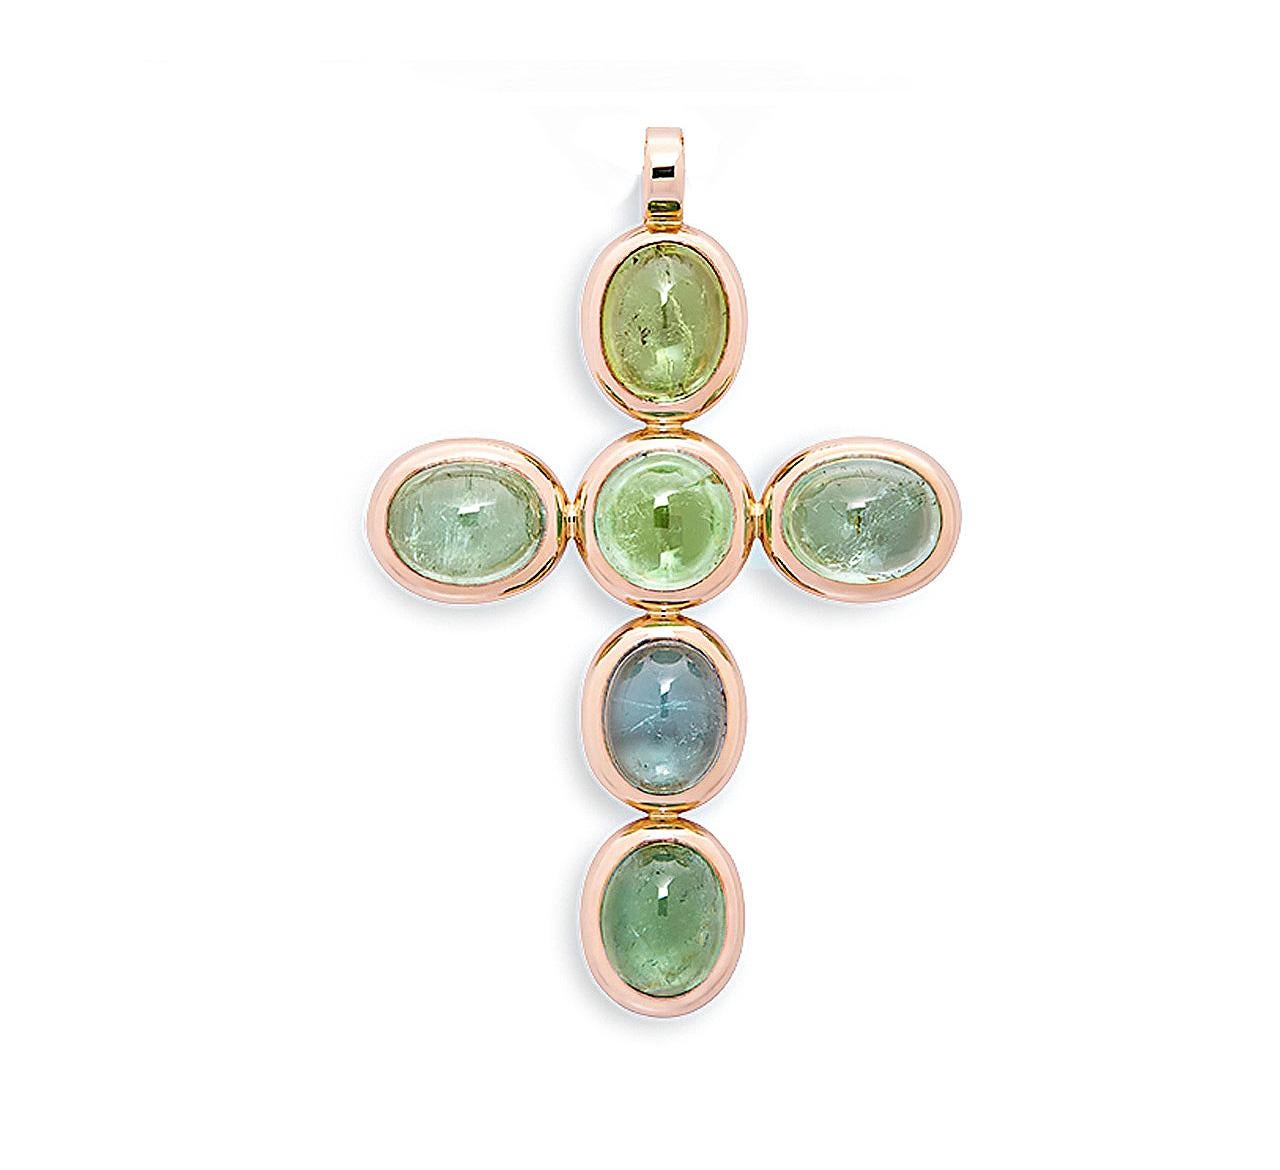 Six tourmaline cabochons 18.39 ct adorn this beautiful 18k rose gold cross-pendant which is designed by Colleen B. Rosenblat.